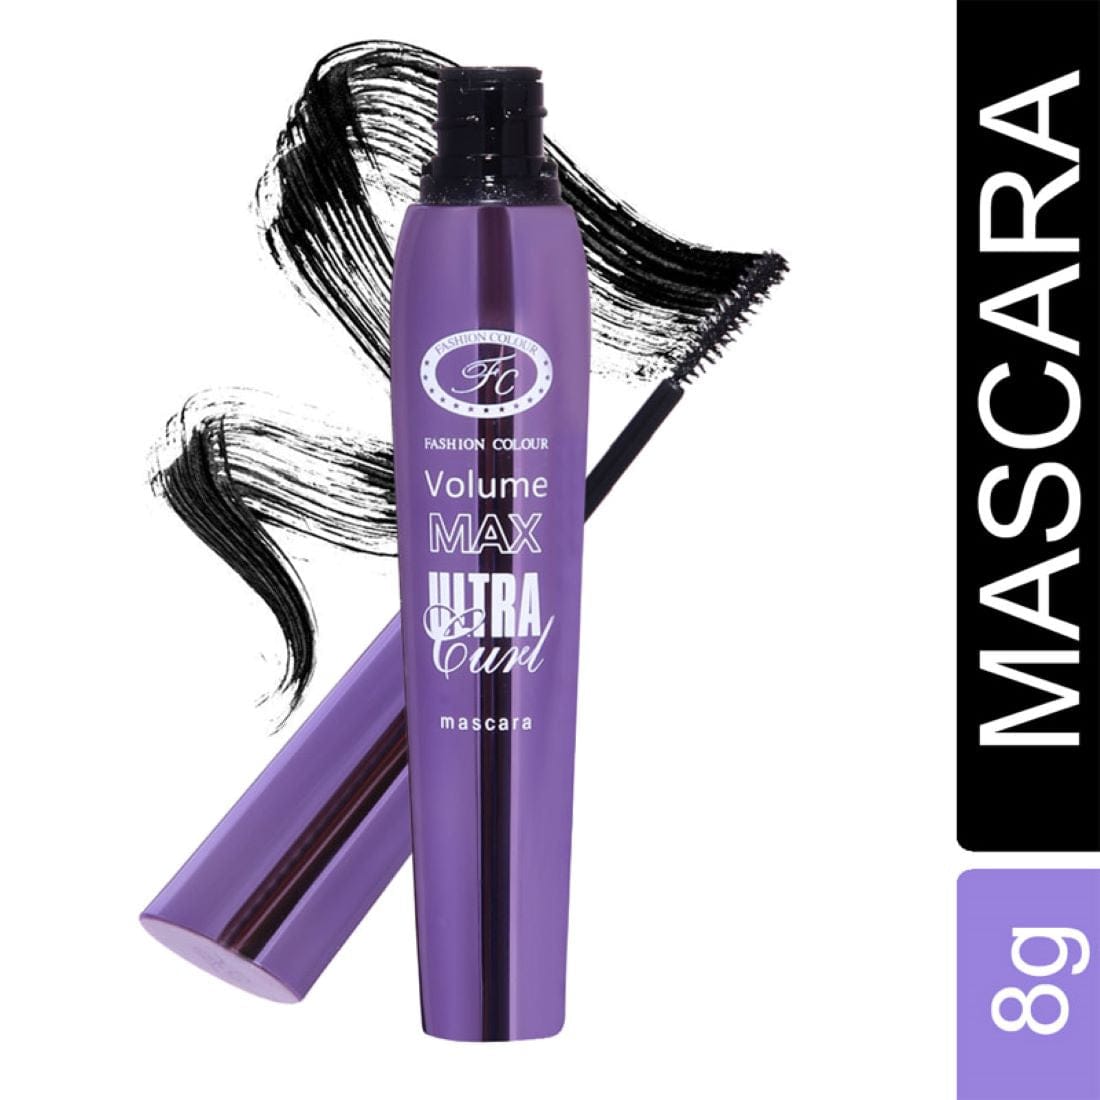 Buy Mascara online in India at best prices from top brands like Blue Heaven, Swiss Beauty, Mars, Essence, Color bar. Grab the best deals available online, Mascara is a cosmetic commonly used to enhance the upper and lower eyelashes. It may darken, thicken, lengthen, and/or define the eyelashes. Some of the best mascaras available in India are Lakme Eyeconic Lash Curling Mascara, Clinique High Impact Volume Mascara,